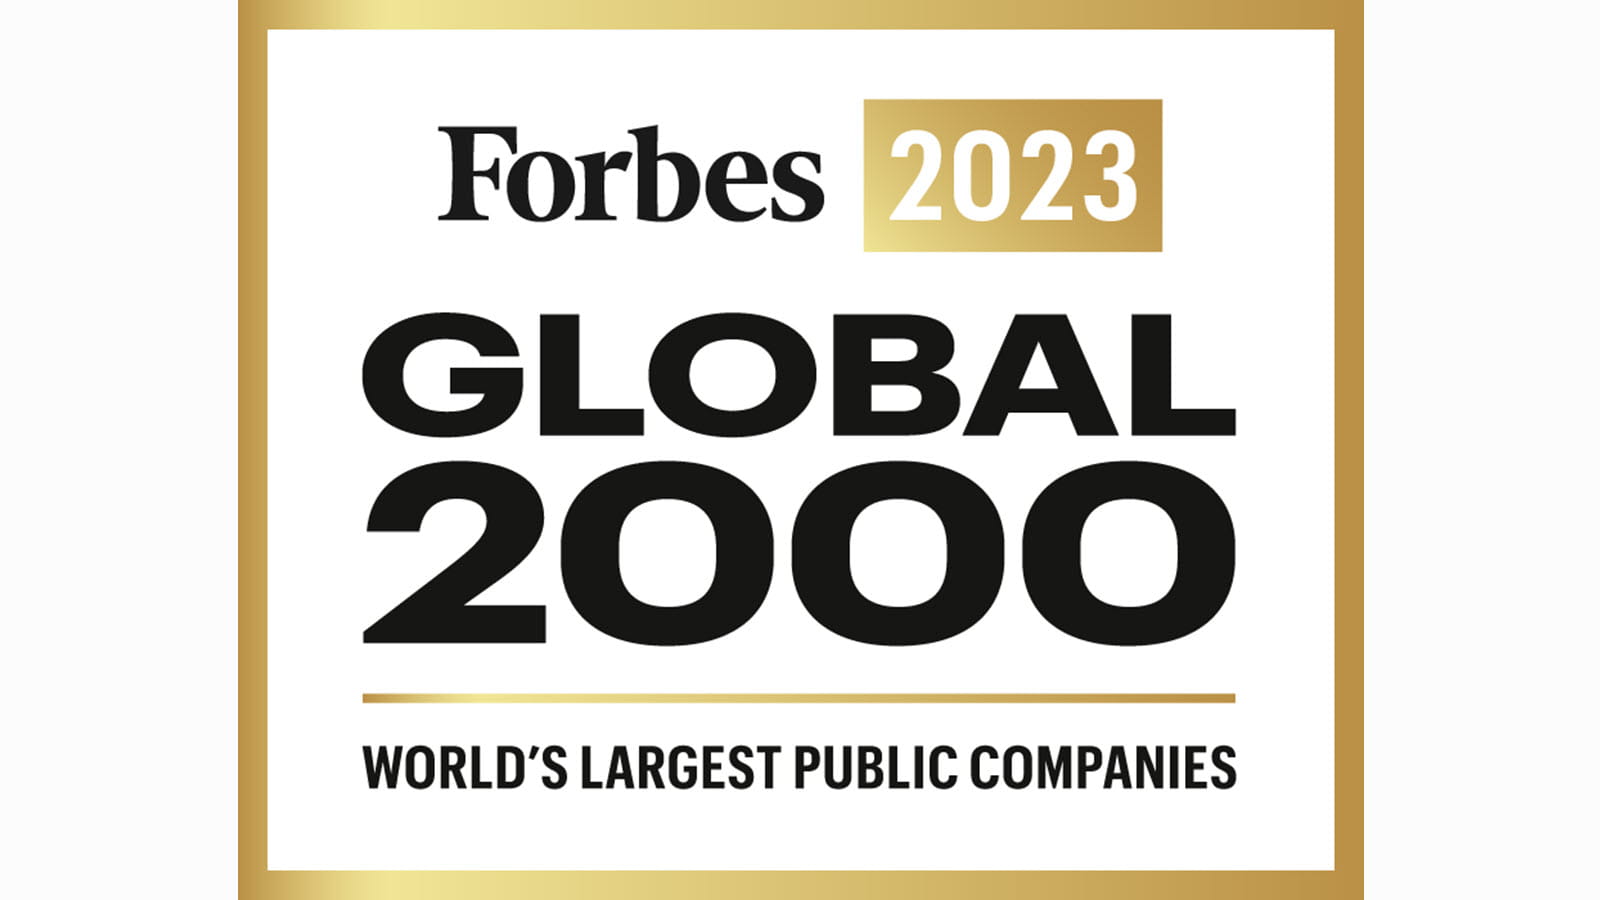 Forbes 2023 Global 2000